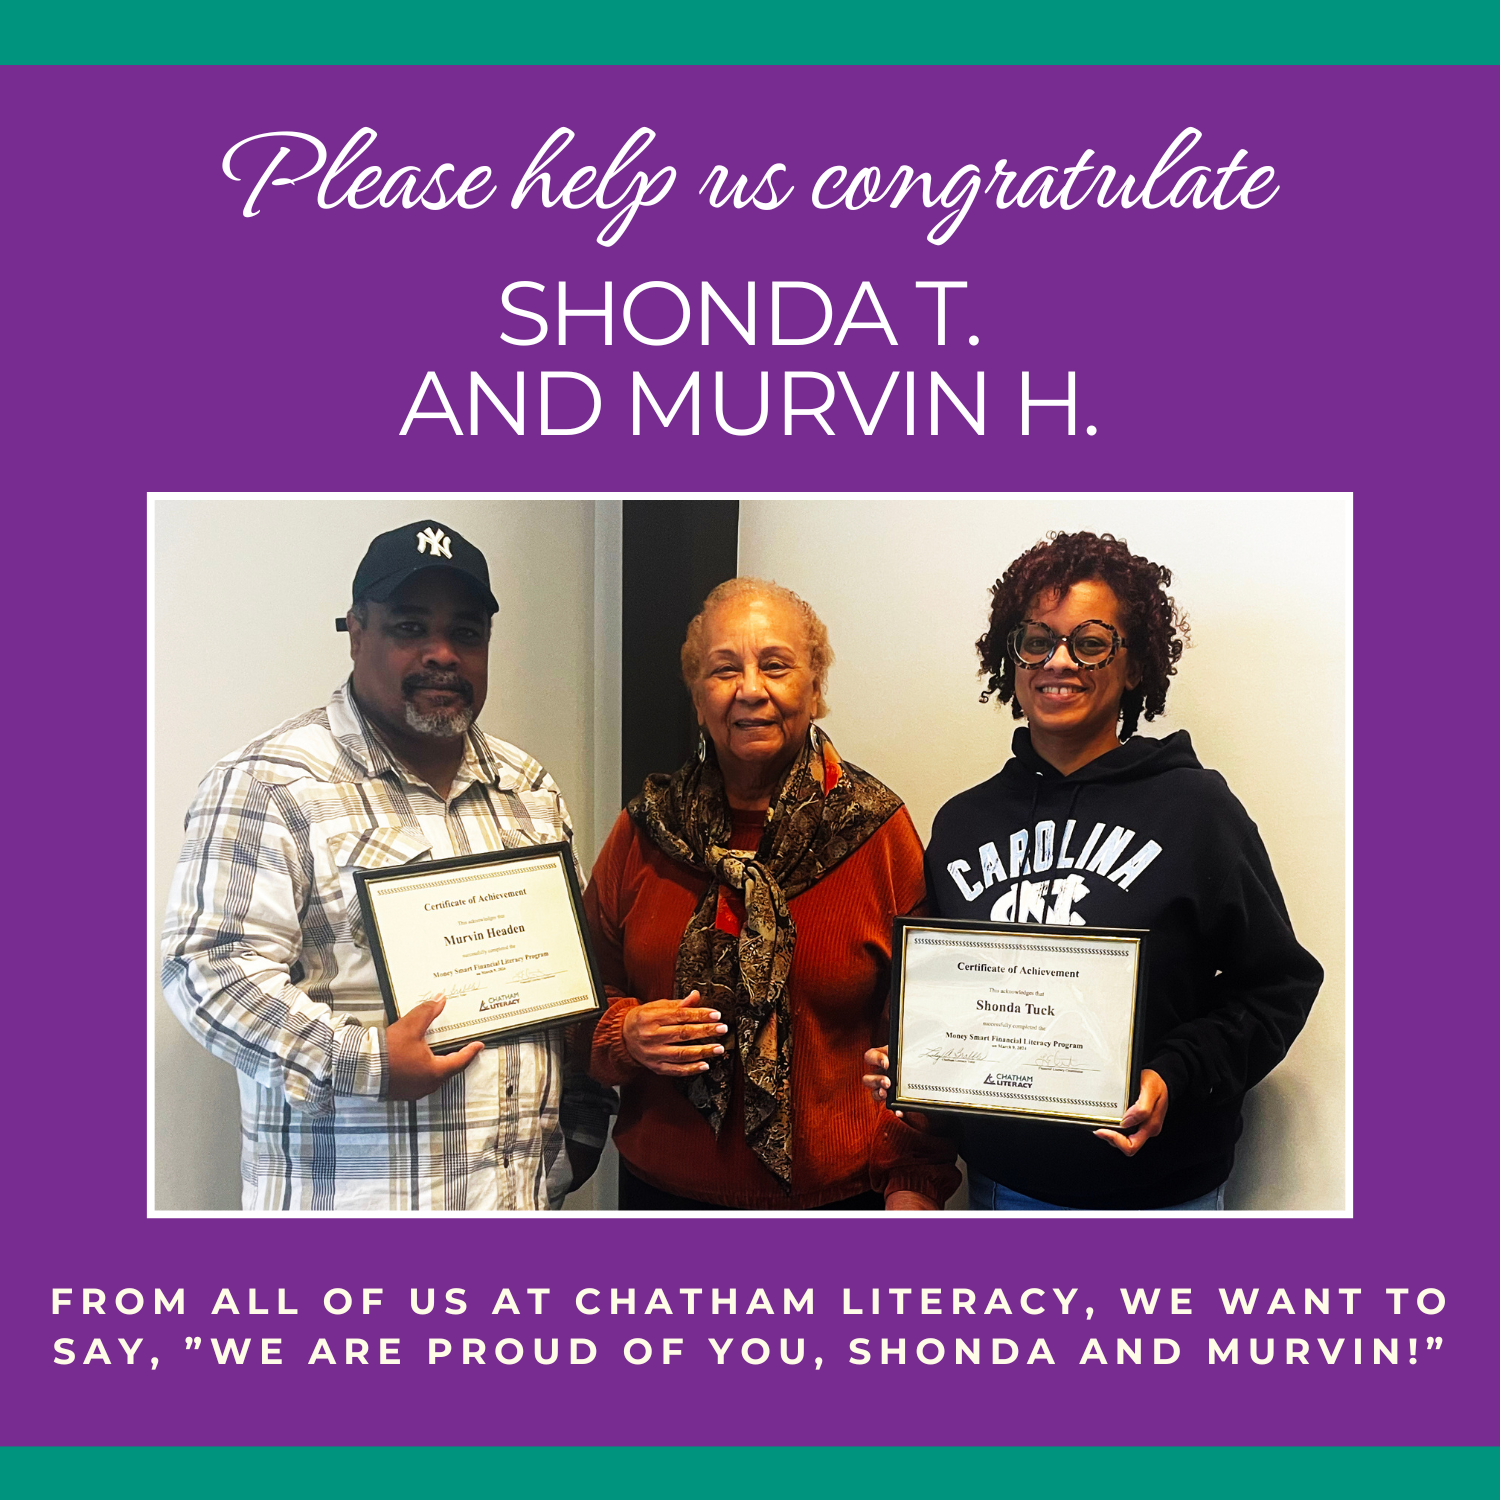 Congratulations to Shonda T. and Murvin H. on Their Certification!